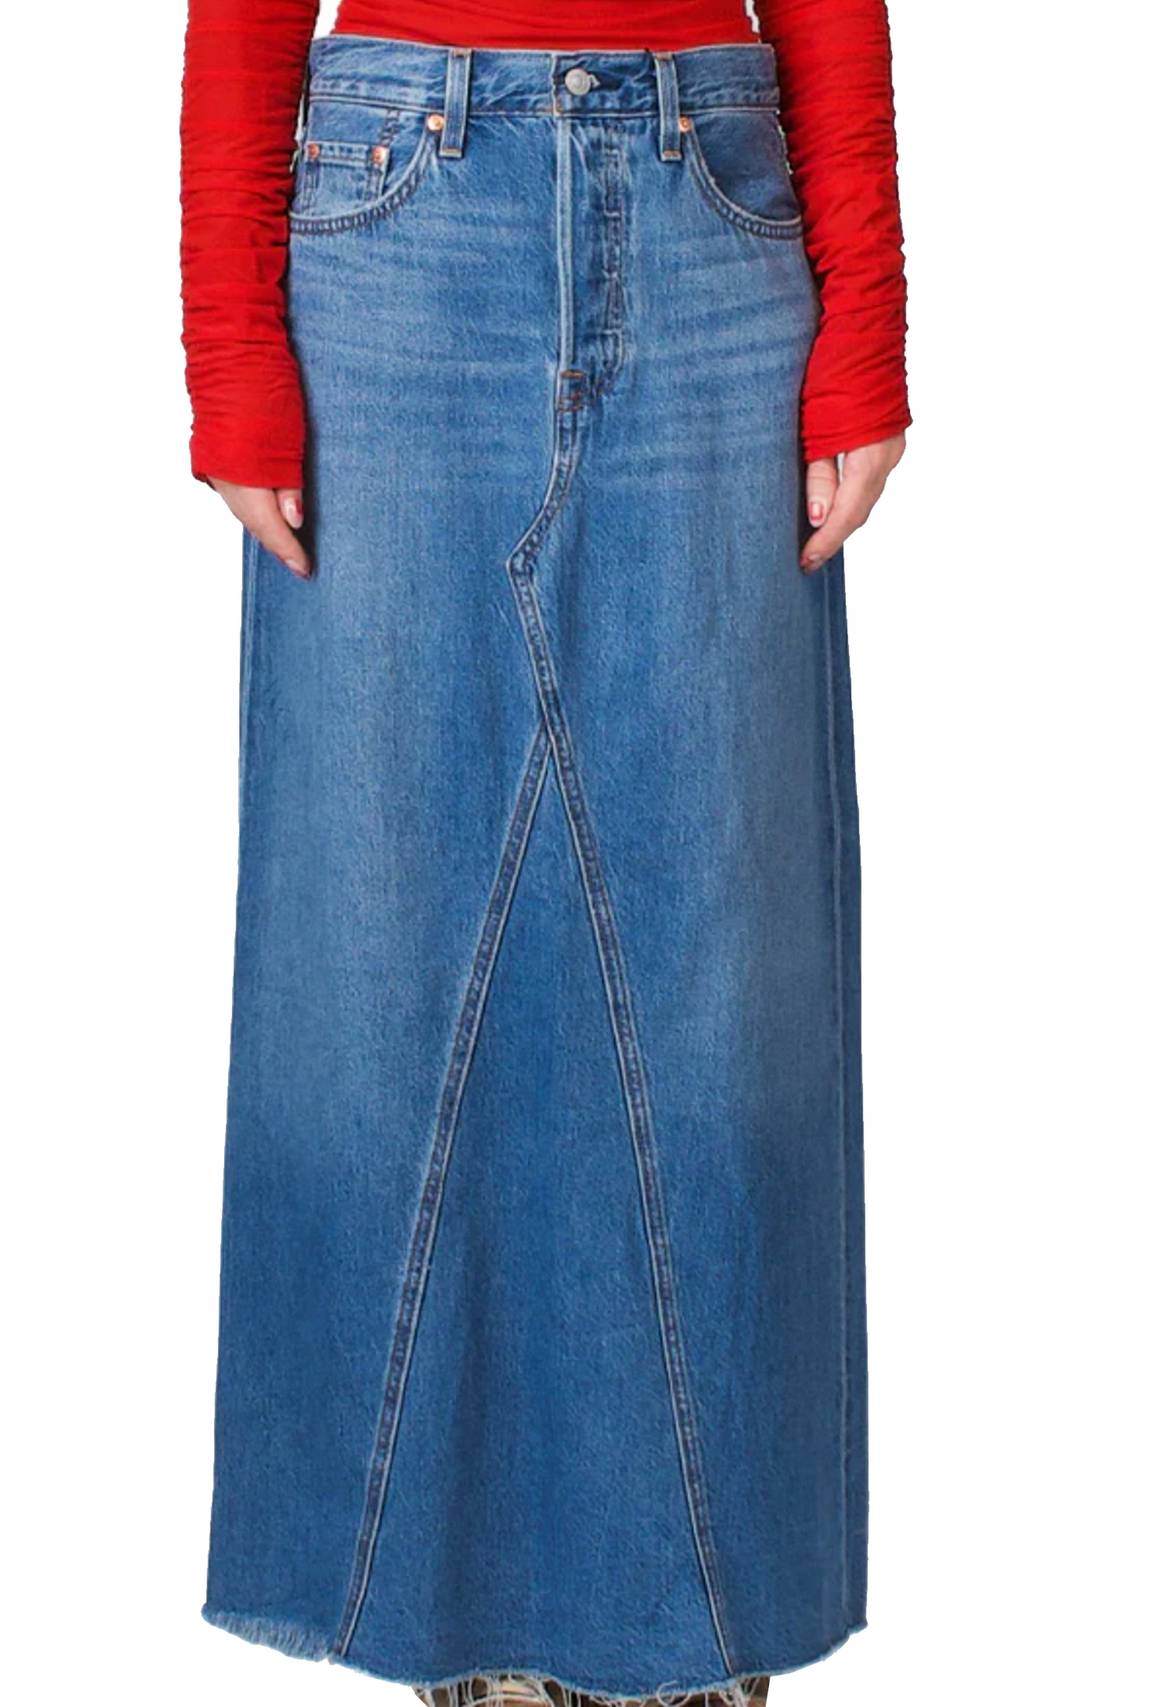 How Long Denim Skirts Went From Anti-Fashion Statement to Runway Must-Have  - WSJ